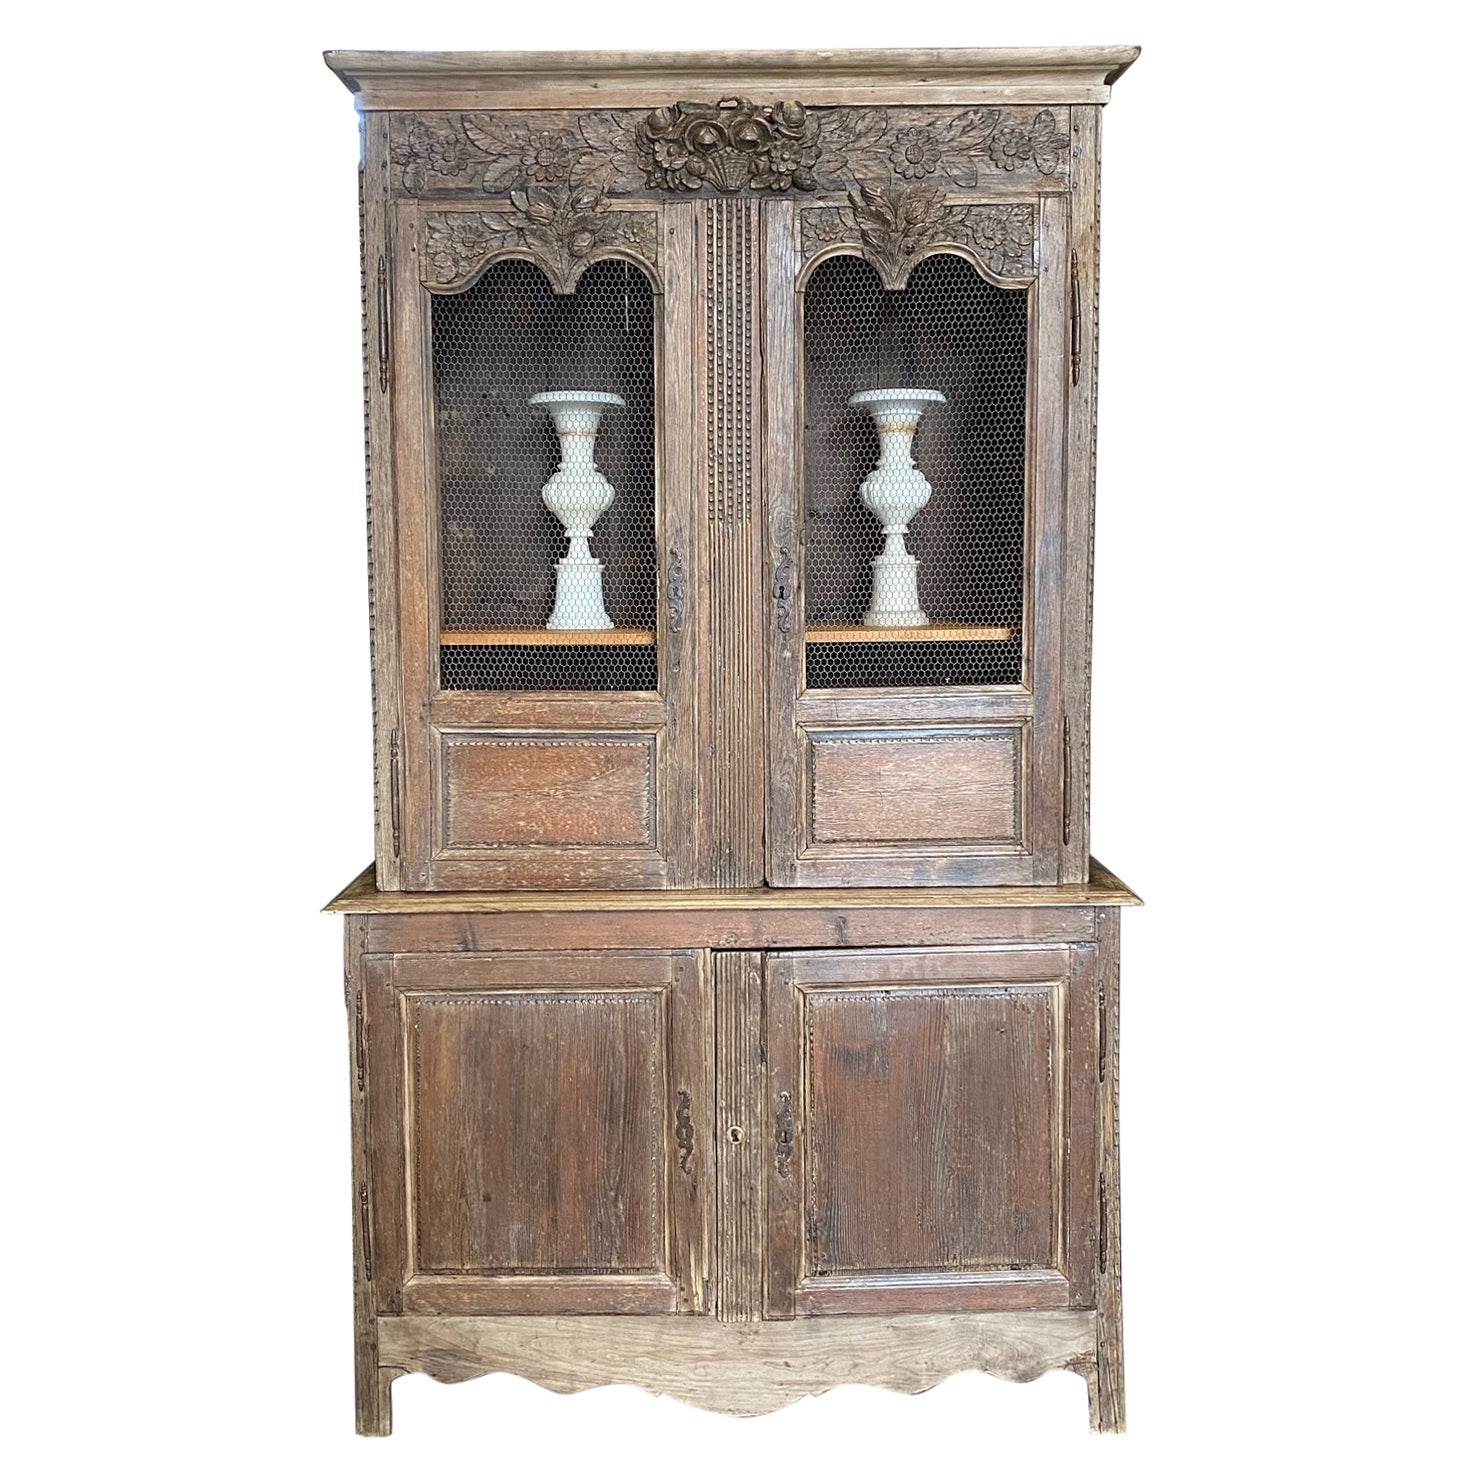 Character Rich French 19th Century Tall Carved Wood Cabinet Bookcase